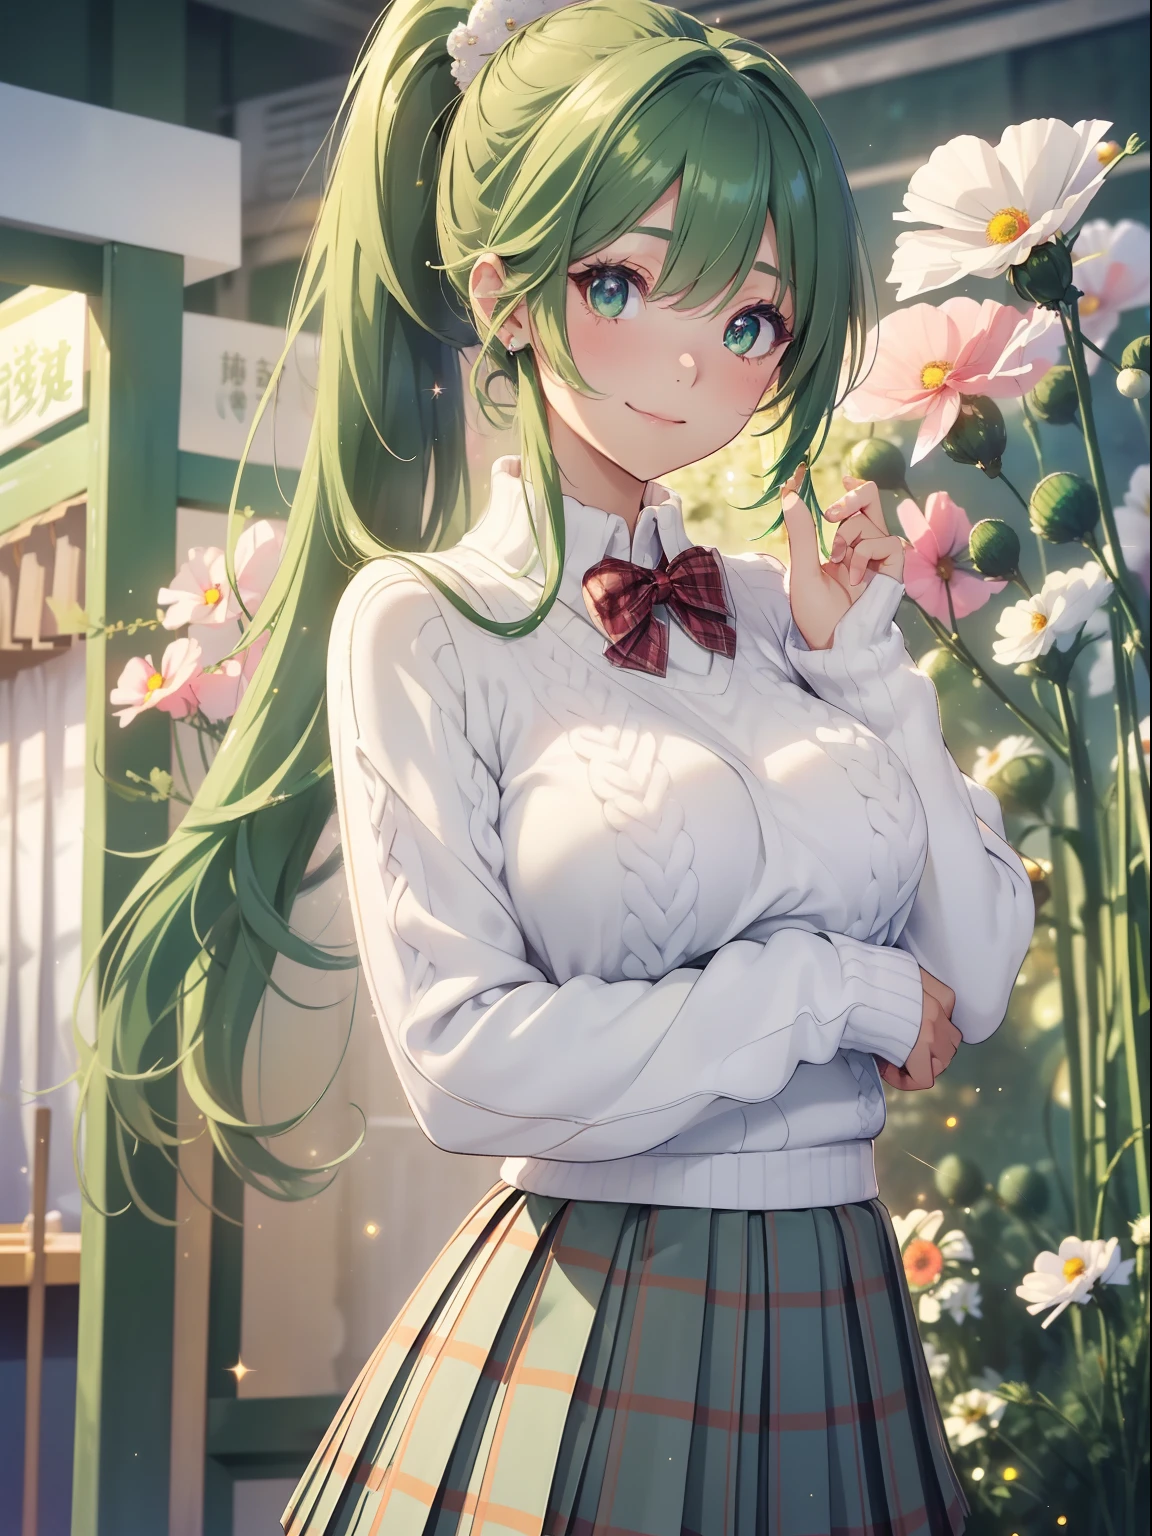 masutepiece, High resolution, 8k, anime woman, Delicate and detailed writing 、Detailed digital illustration、absurdly long hair、(((Ponytail)))、Shiny hair、a very beautiful woman、Eyes are double, Large,Little hanging eyes、 Bust E Cup、High image quality, High quality、Detailed background、、The inside of the eye shines like a diamond、(((Dark green hair)))、Gradient pupil、(((2 arms、4 fingers, 1 thumb)))、Detailed female face、a very beautiful woman、、Detailed background、​masterpiece、Soft Focus , Bright gradient watercolor , Lens Flare , (((glitter))) , Glow , Dreamy ,a miniskirt、idol、Light Green Ribbon、Very beautiful light green rose hair accessories、Light green and gold costume with white as the main color、((Macroface))、(Cool Girl).Tall lady、Dignified.((No bangs))、Eyes with blue gradient glow、Full smile、(((Face Close-up)、(((Winding check stall))) 、(School Uniforms:1.2), (wearing a white knitted sweater over a white shirt,,,,,:1.3), (Plaid pleated skirt:1.3),(((Cosmos Garden)))、Full smile